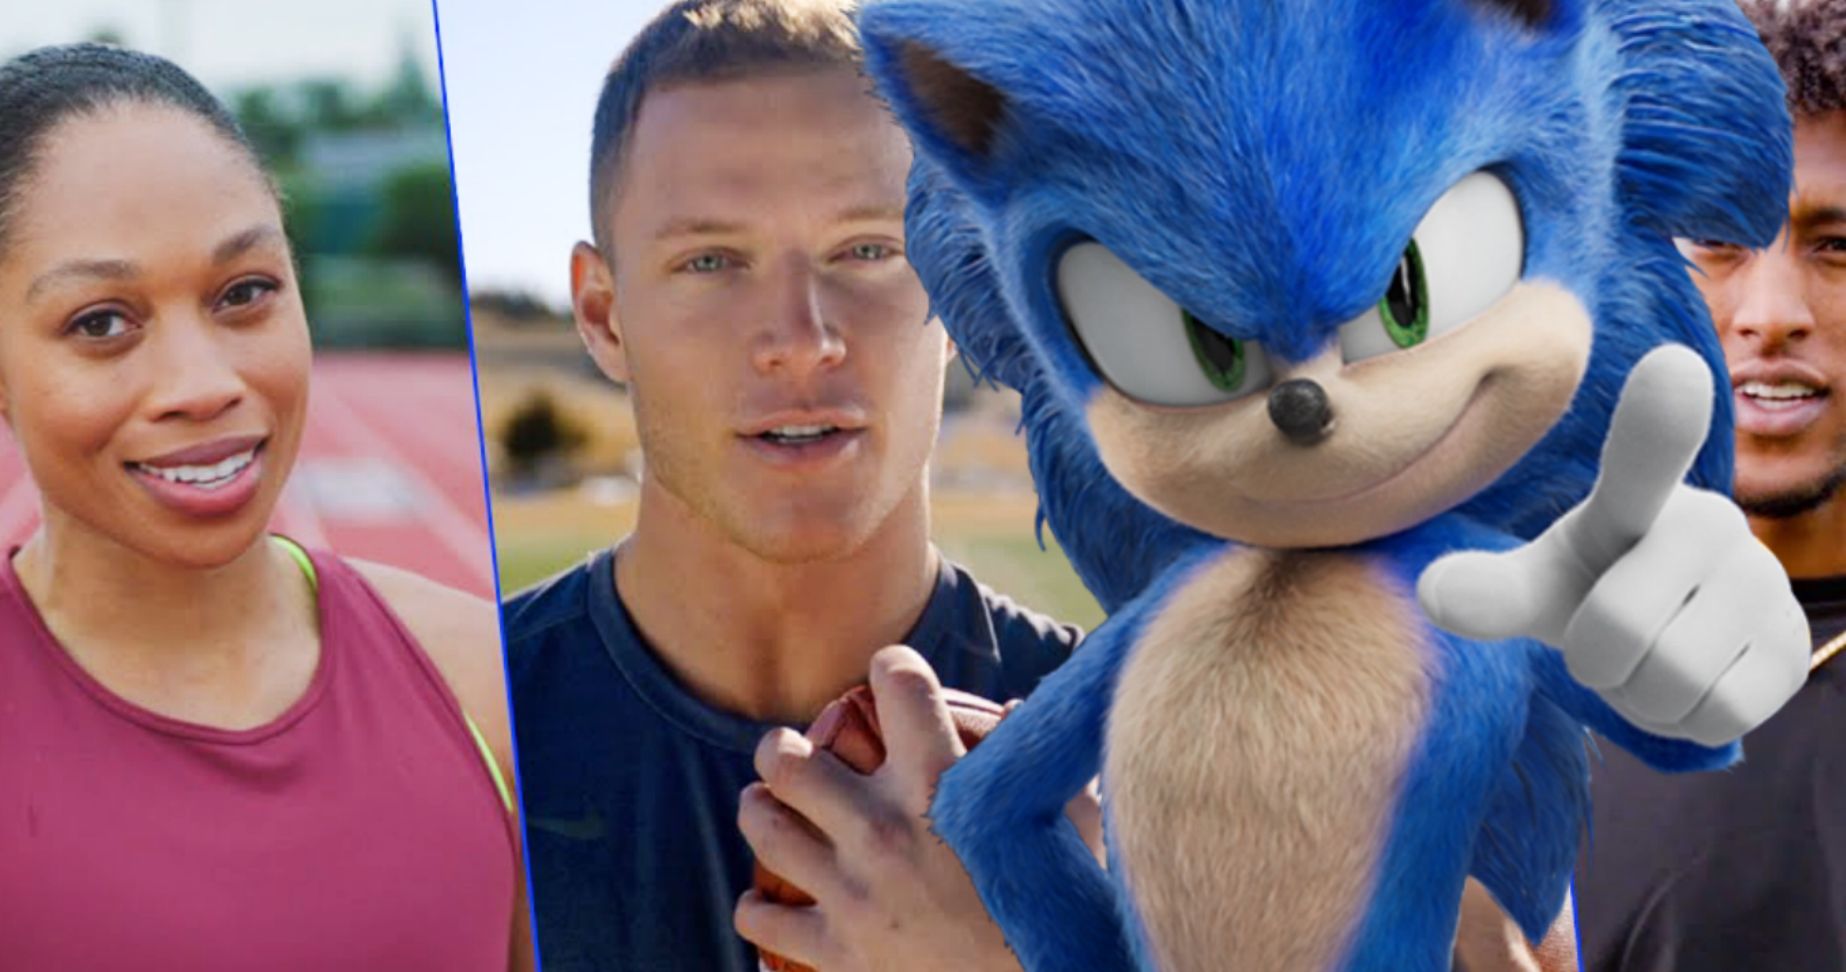 Sonic the Hedgehog Super Bowl Trailer Speeds in with Big Sports Star Cameos